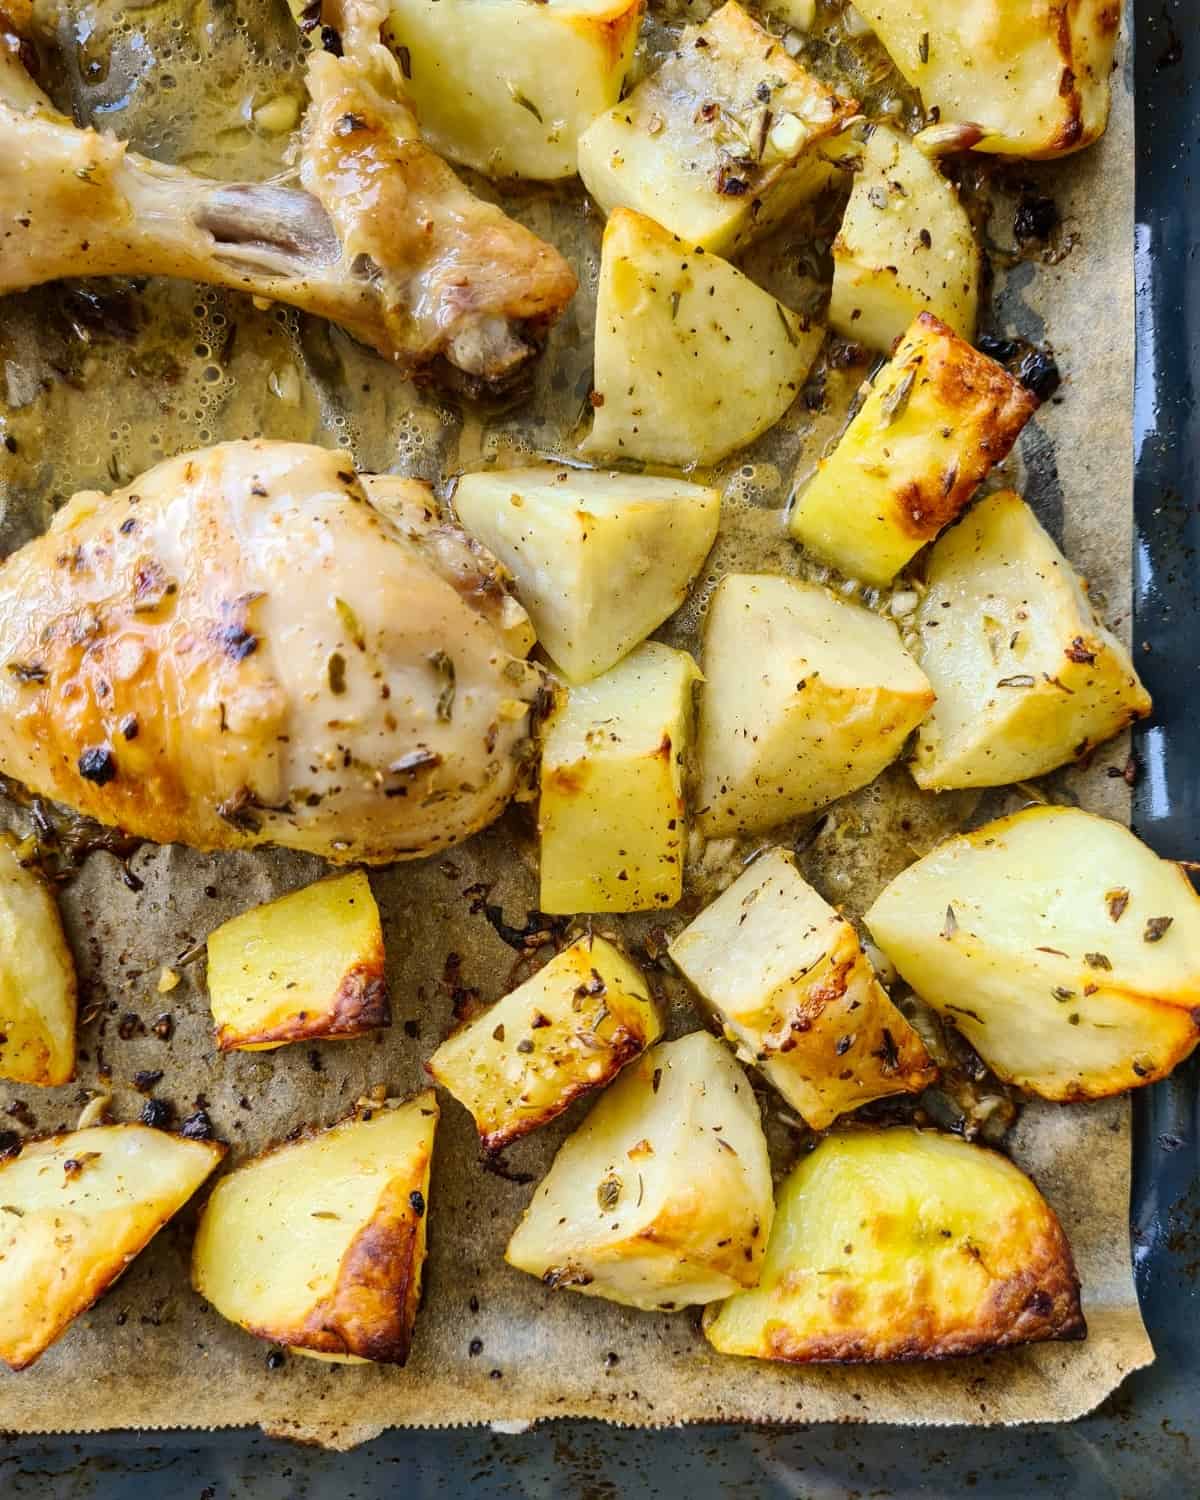 close up image of a corner of a baking tray filled with roasted potatoes and drumsticks